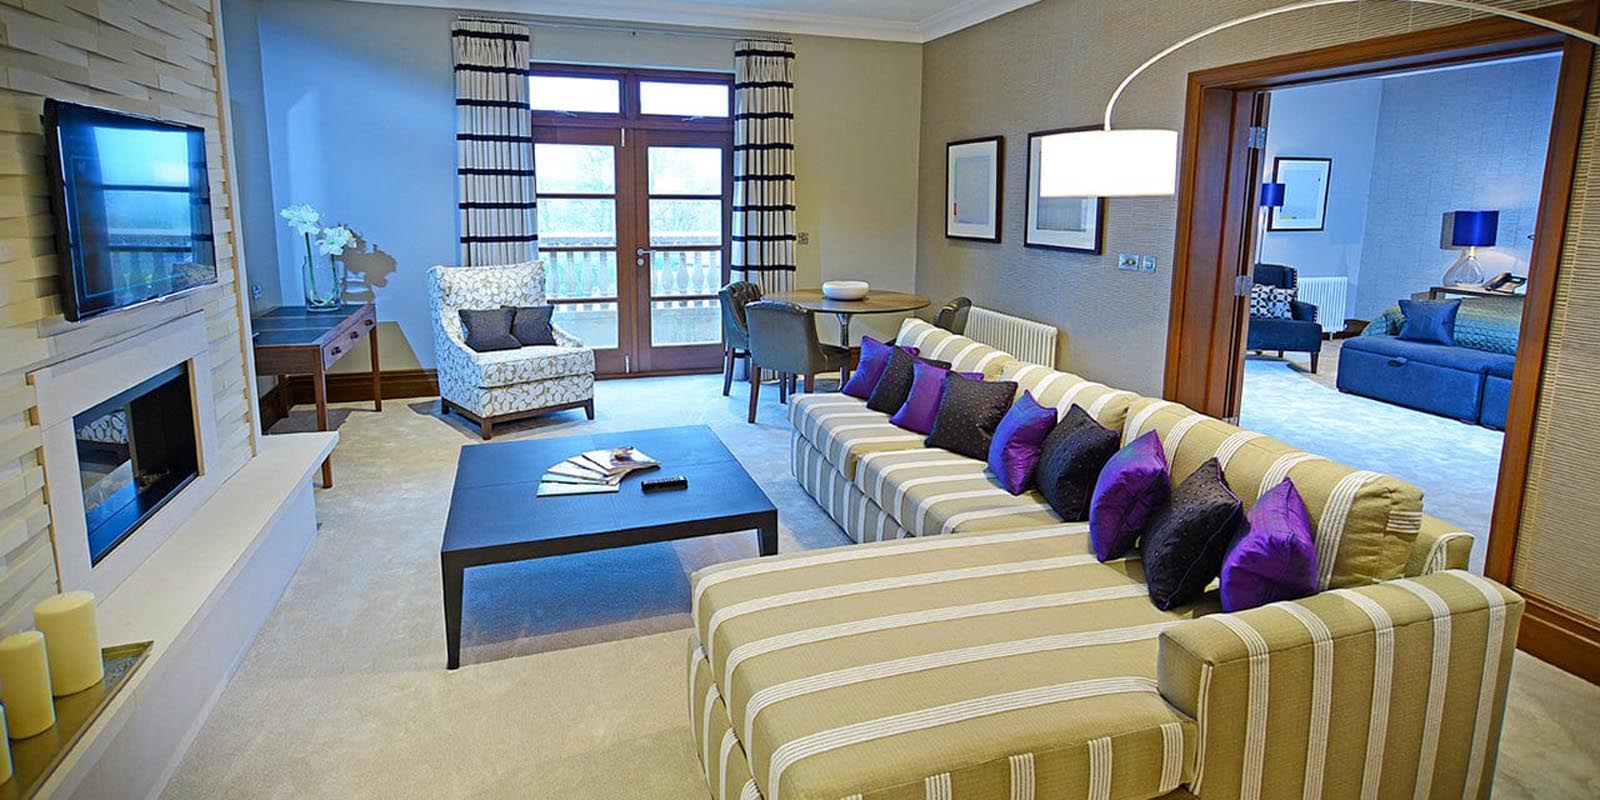 Seating area in the garden lodge suite, with an L shaped sofa, coffee table, TV and fireplace.